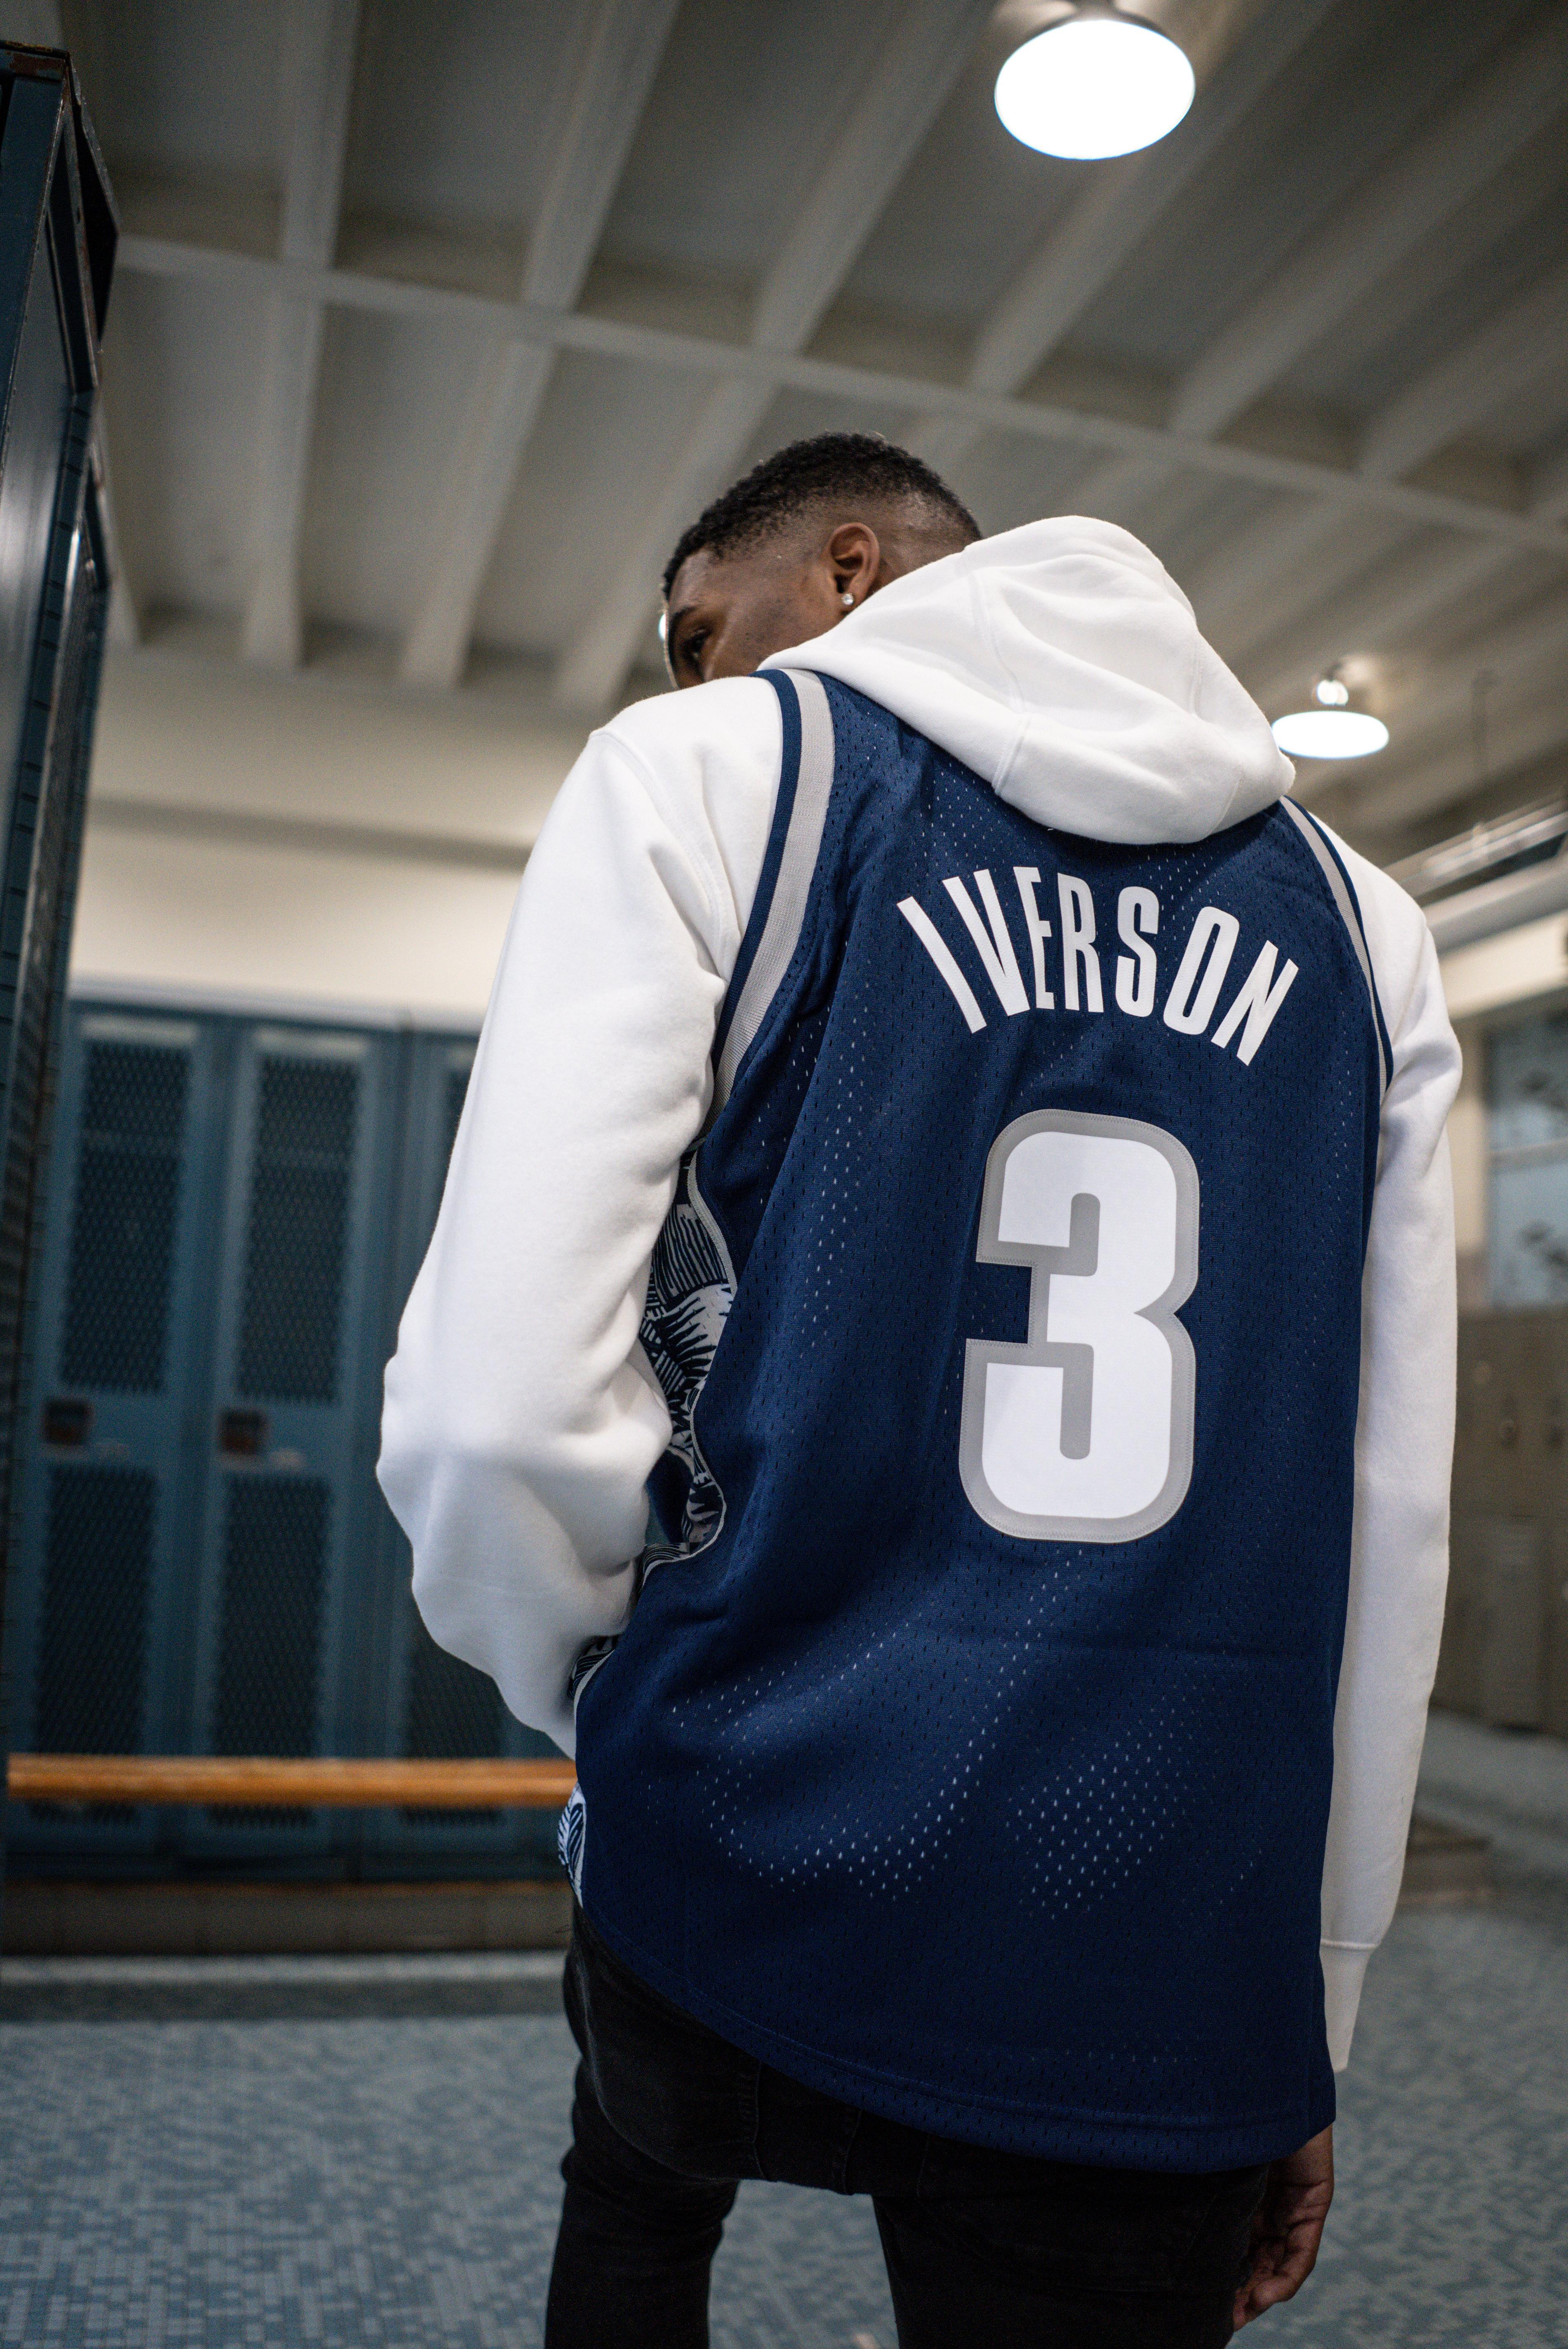 allen iverson wearing his new jersey over his draft day suit will